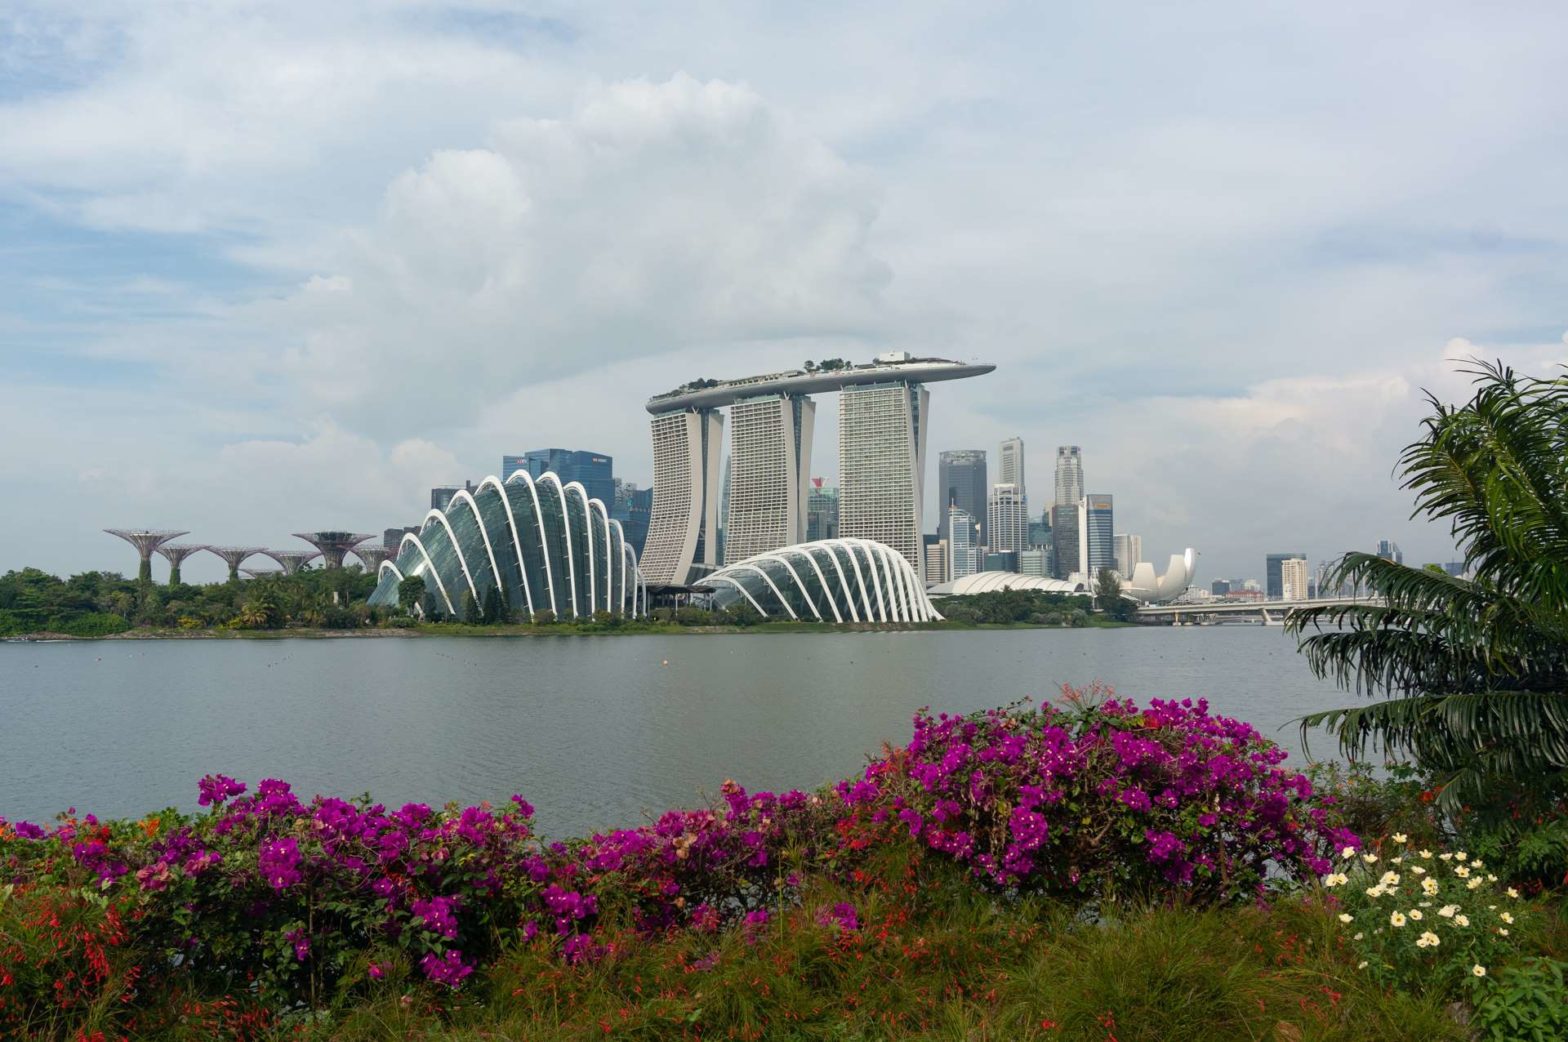 Hike around Marina Reservoir with Marina Bay Sands in the picture